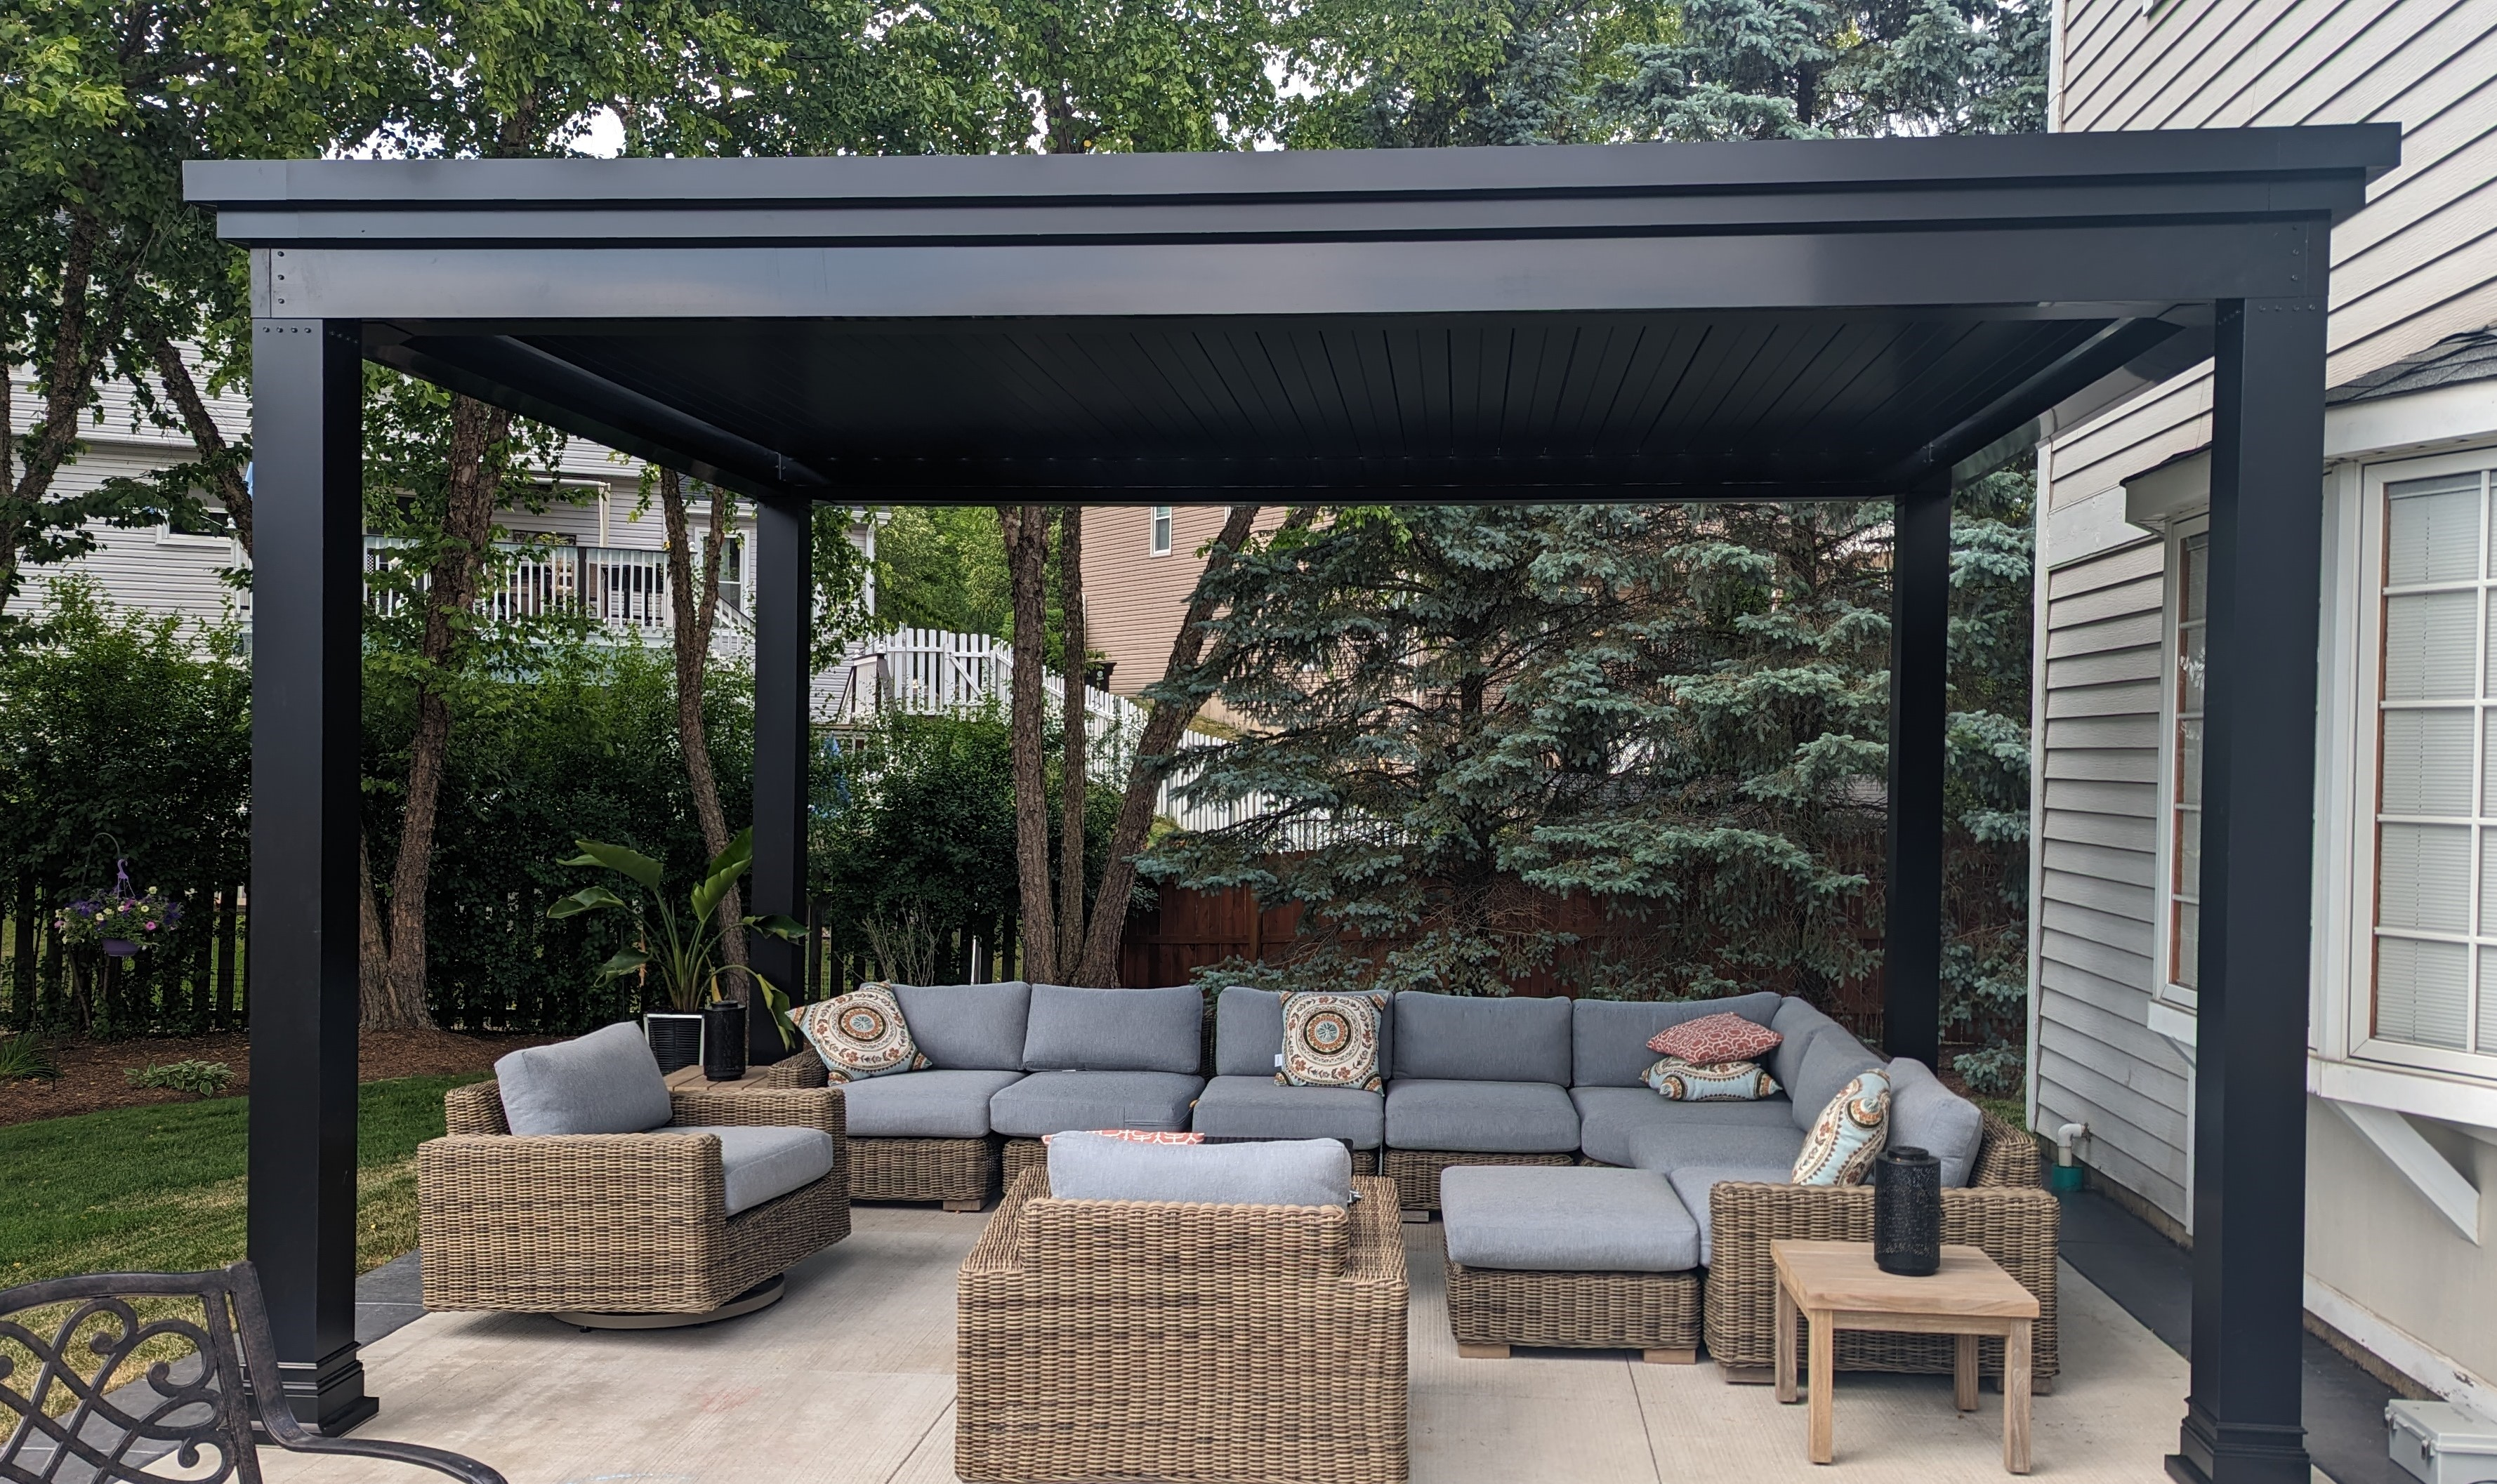 Outdoor living space  with pergola add on to create shade with enough space to host creating memories